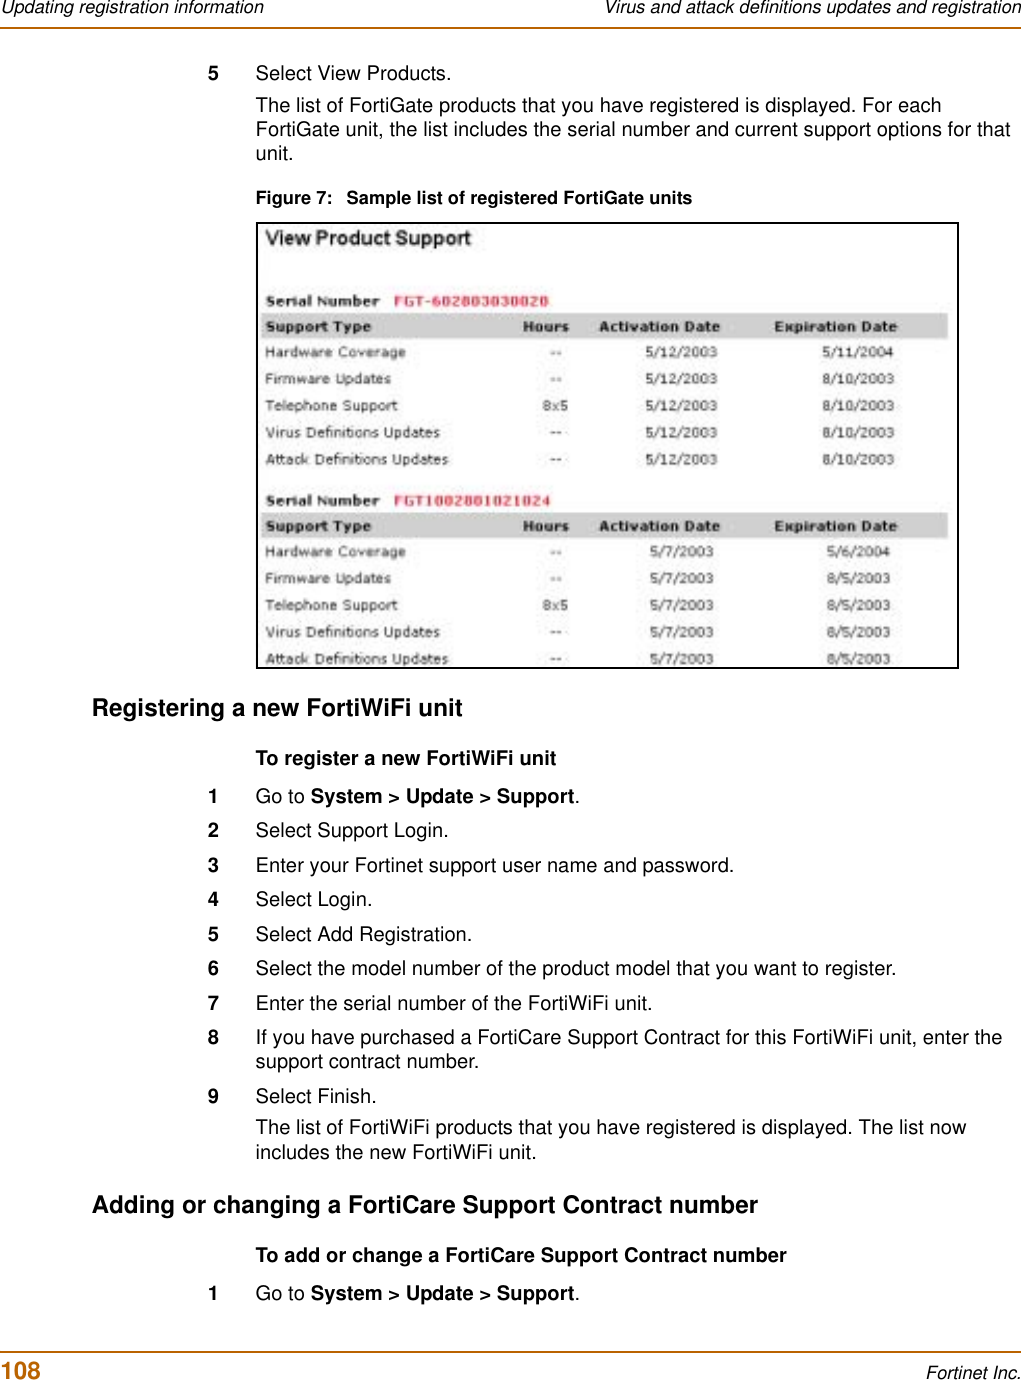 108 Fortinet Inc.Updating registration information Virus and attack definitions updates and registration5Select View Products.The list of FortiGate products that you have registered is displayed. For each FortiGate unit, the list includes the serial number and current support options for that unit.Figure 7: Sample list of registered FortiGate unitsRegistering a new FortiWiFi unitTo register a new FortiWiFi unit1Go to System &gt; Update &gt; Support.2Select Support Login.3Enter your Fortinet support user name and password.4Select Login.5Select Add Registration.6Select the model number of the product model that you want to register.7Enter the serial number of the FortiWiFi unit.8If you have purchased a FortiCare Support Contract for this FortiWiFi unit, enter the support contract number.9Select Finish.The list of FortiWiFi products that you have registered is displayed. The list now includes the new FortiWiFi unit.Adding or changing a FortiCare Support Contract numberTo add or change a FortiCare Support Contract number1Go to System &gt; Update &gt; Support.